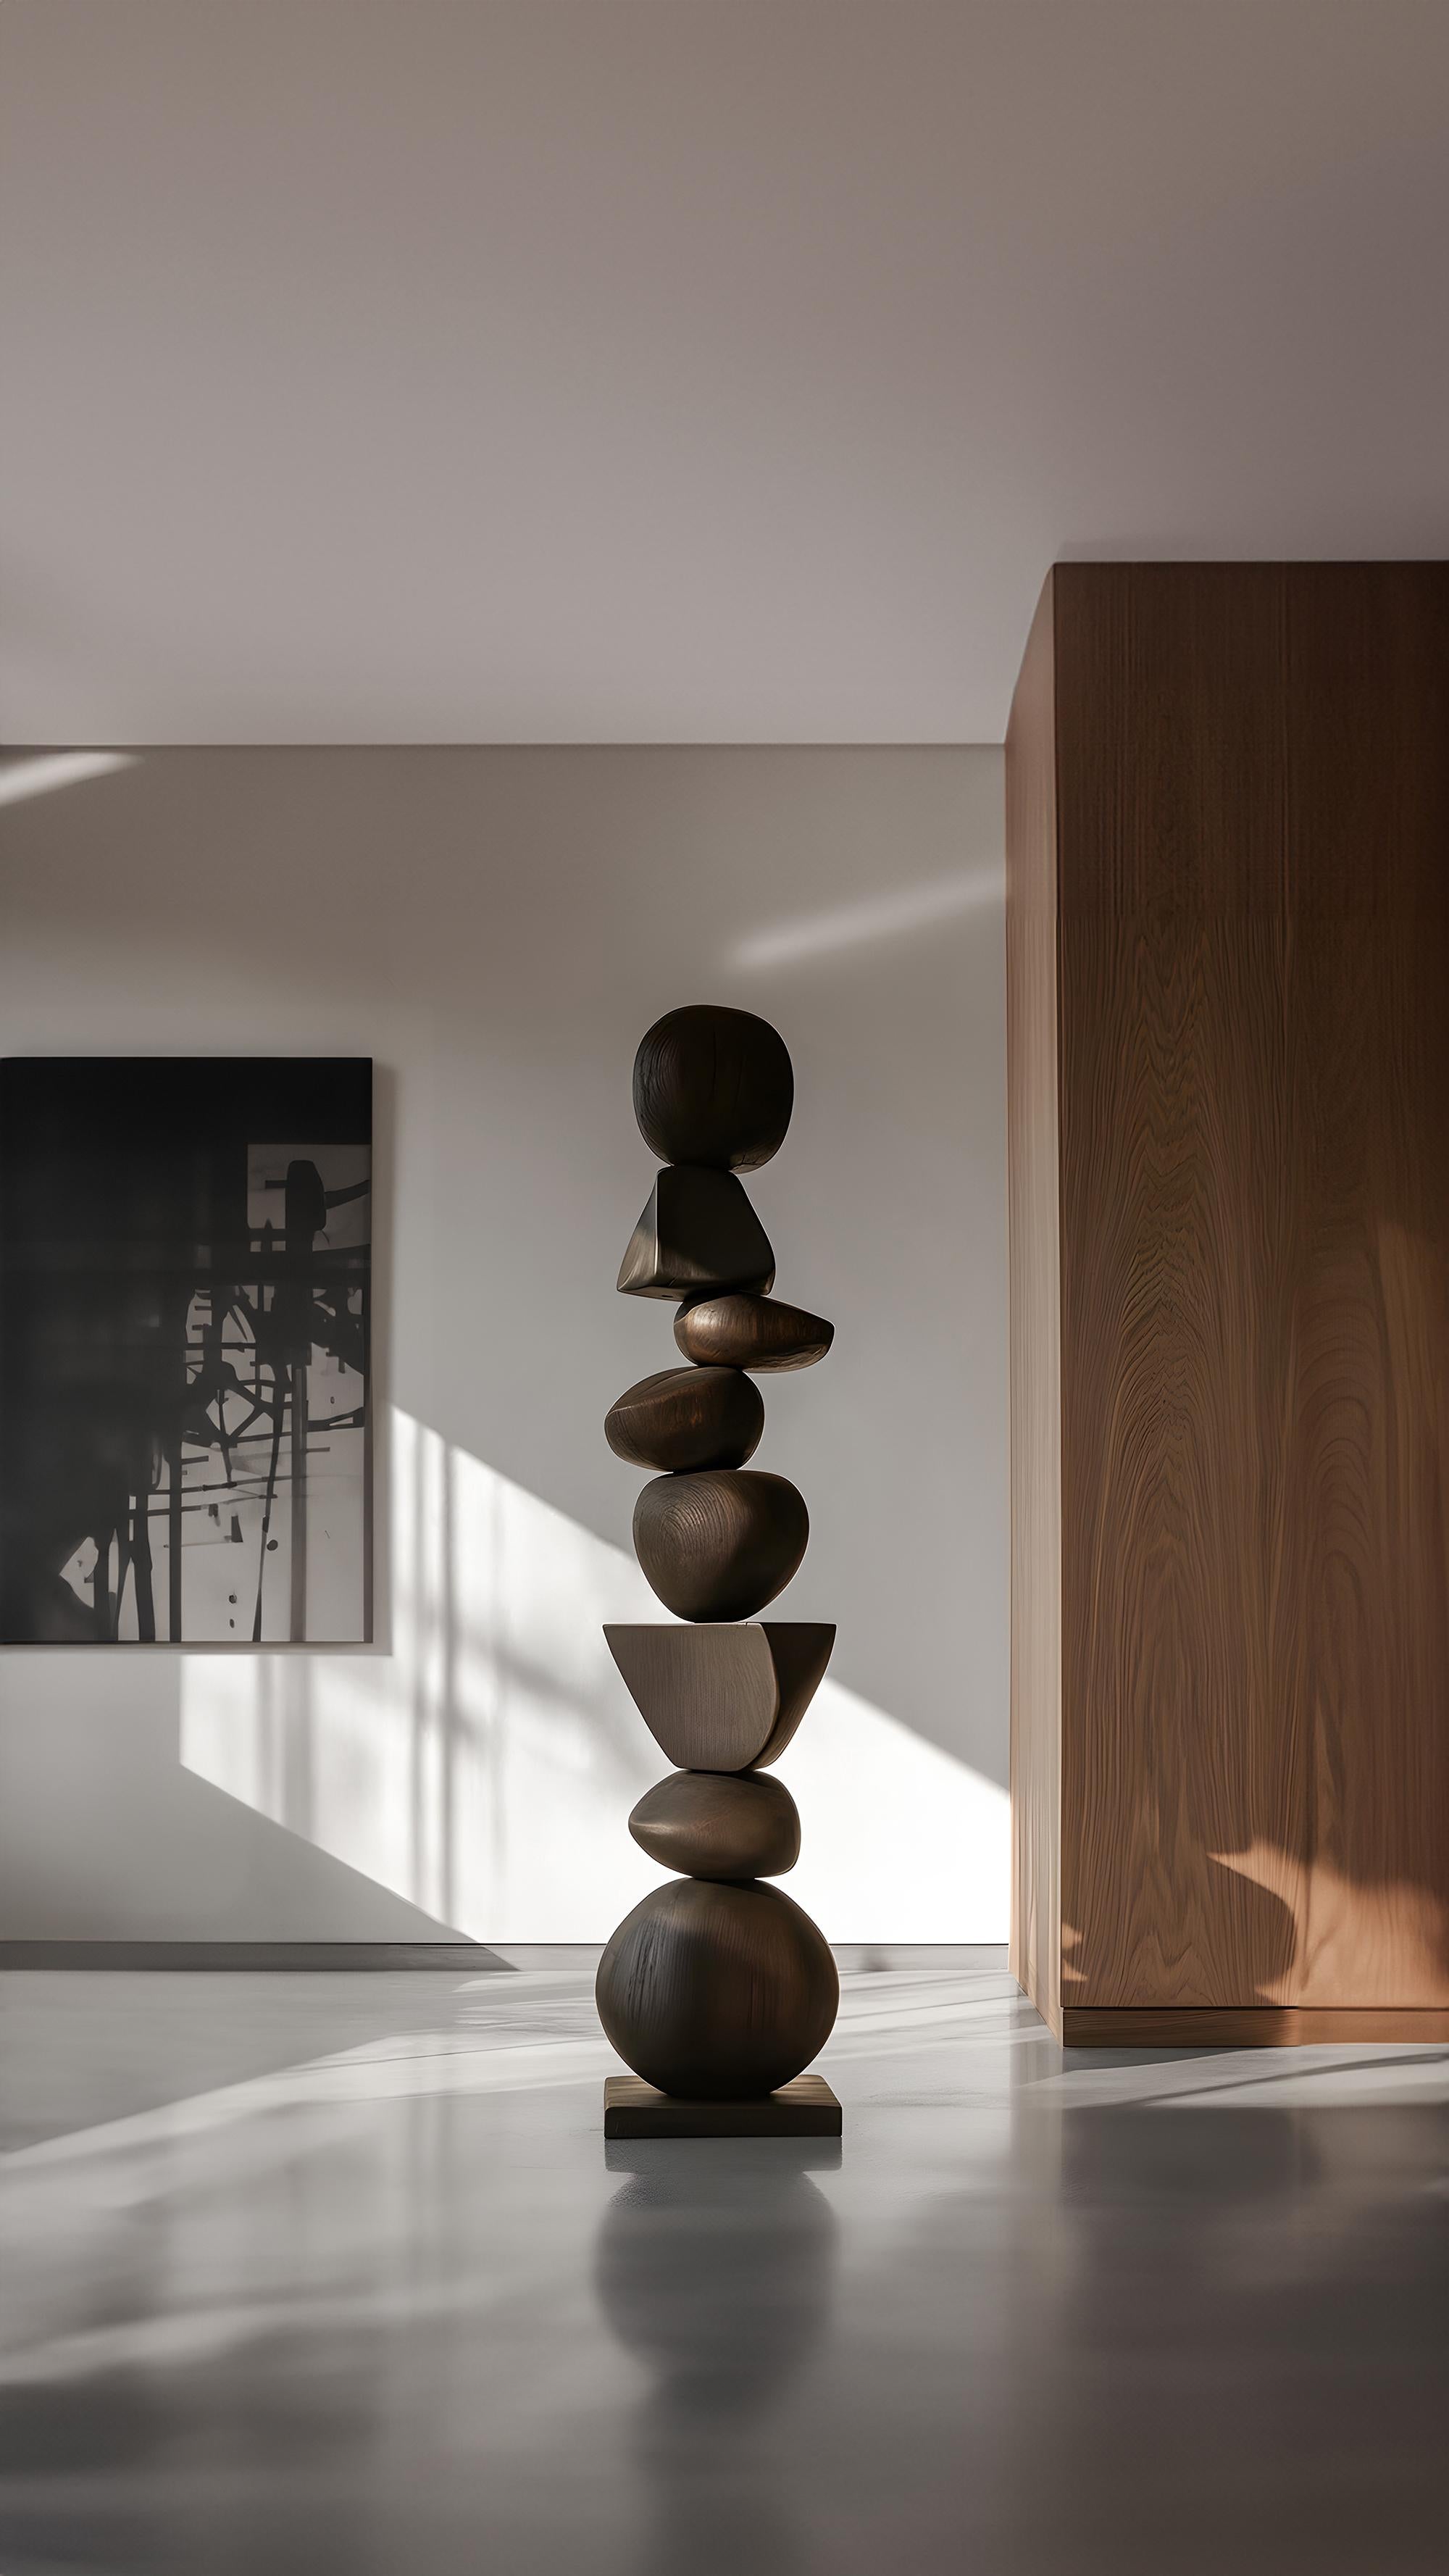 Hand-Crafted In Burned Oak, a Dark Biomorphic Sculpture of Elegance Emerges, Still Stand No97 For Sale